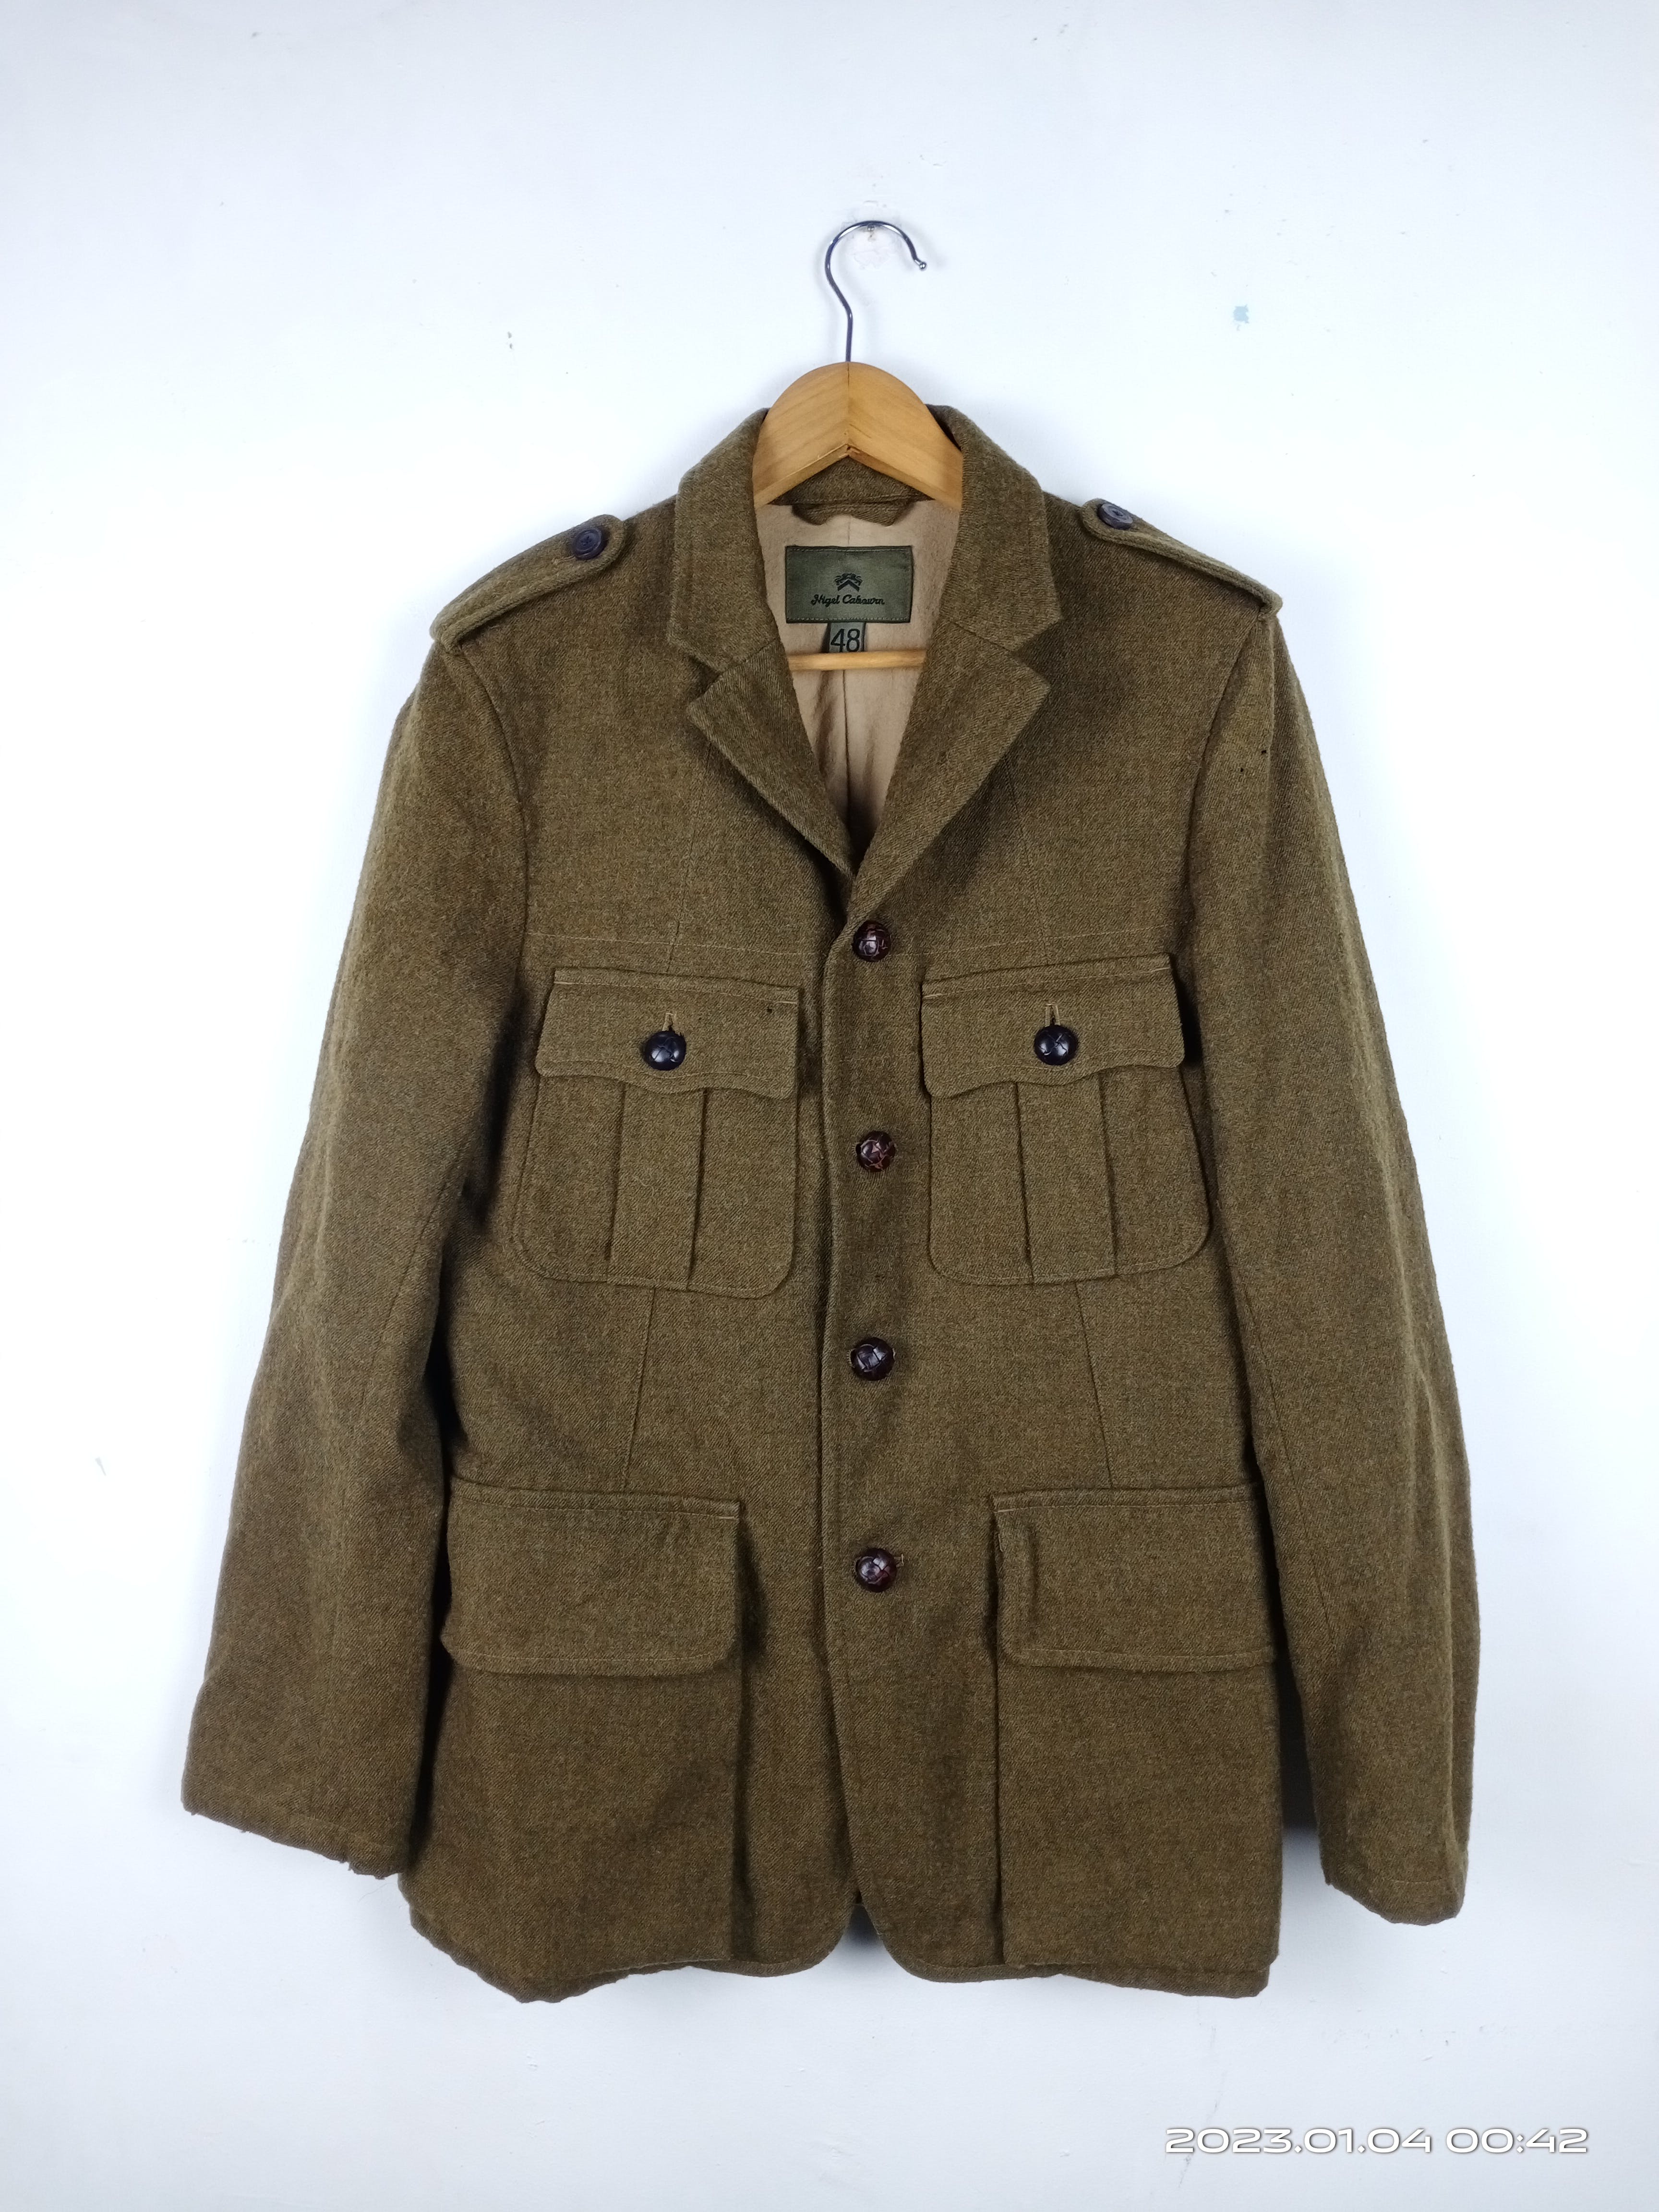 💥RARE💥Vintage Nigel Cabourn Wool Military Style Jacket - 1